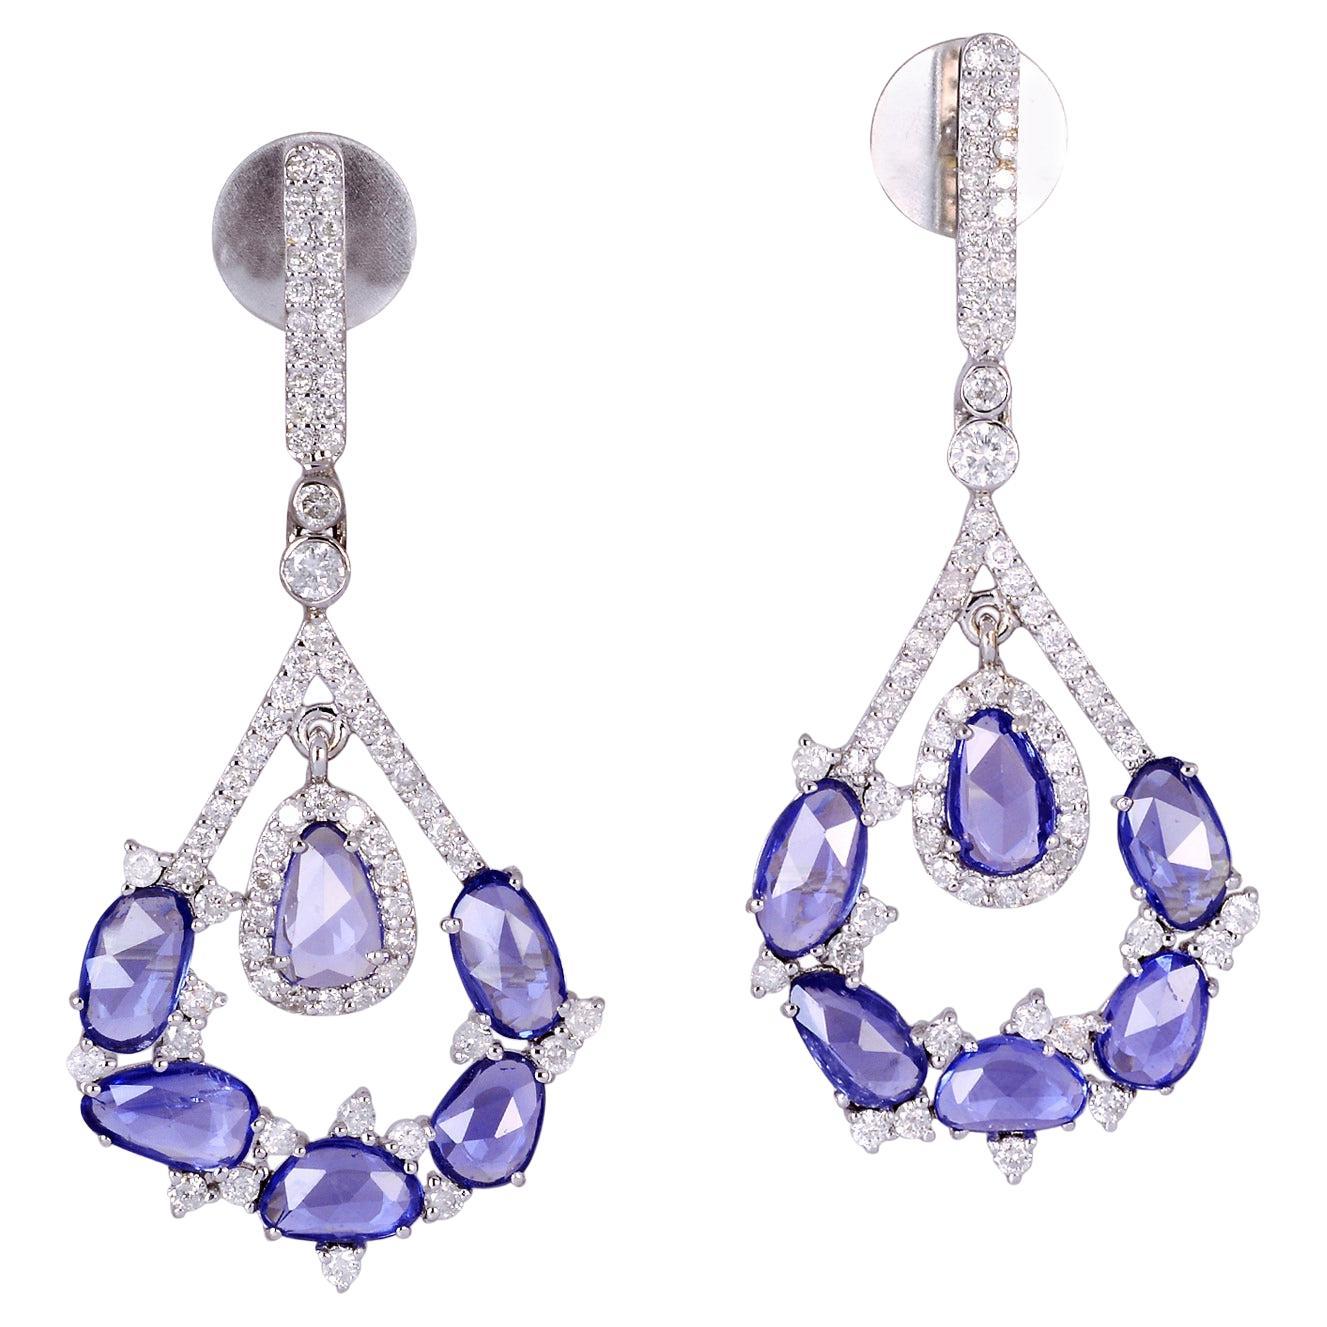 5.70 ct Oval Shaped Blue Sapphire Dangle Earrings With Diamonds In 18k Gold For Sale